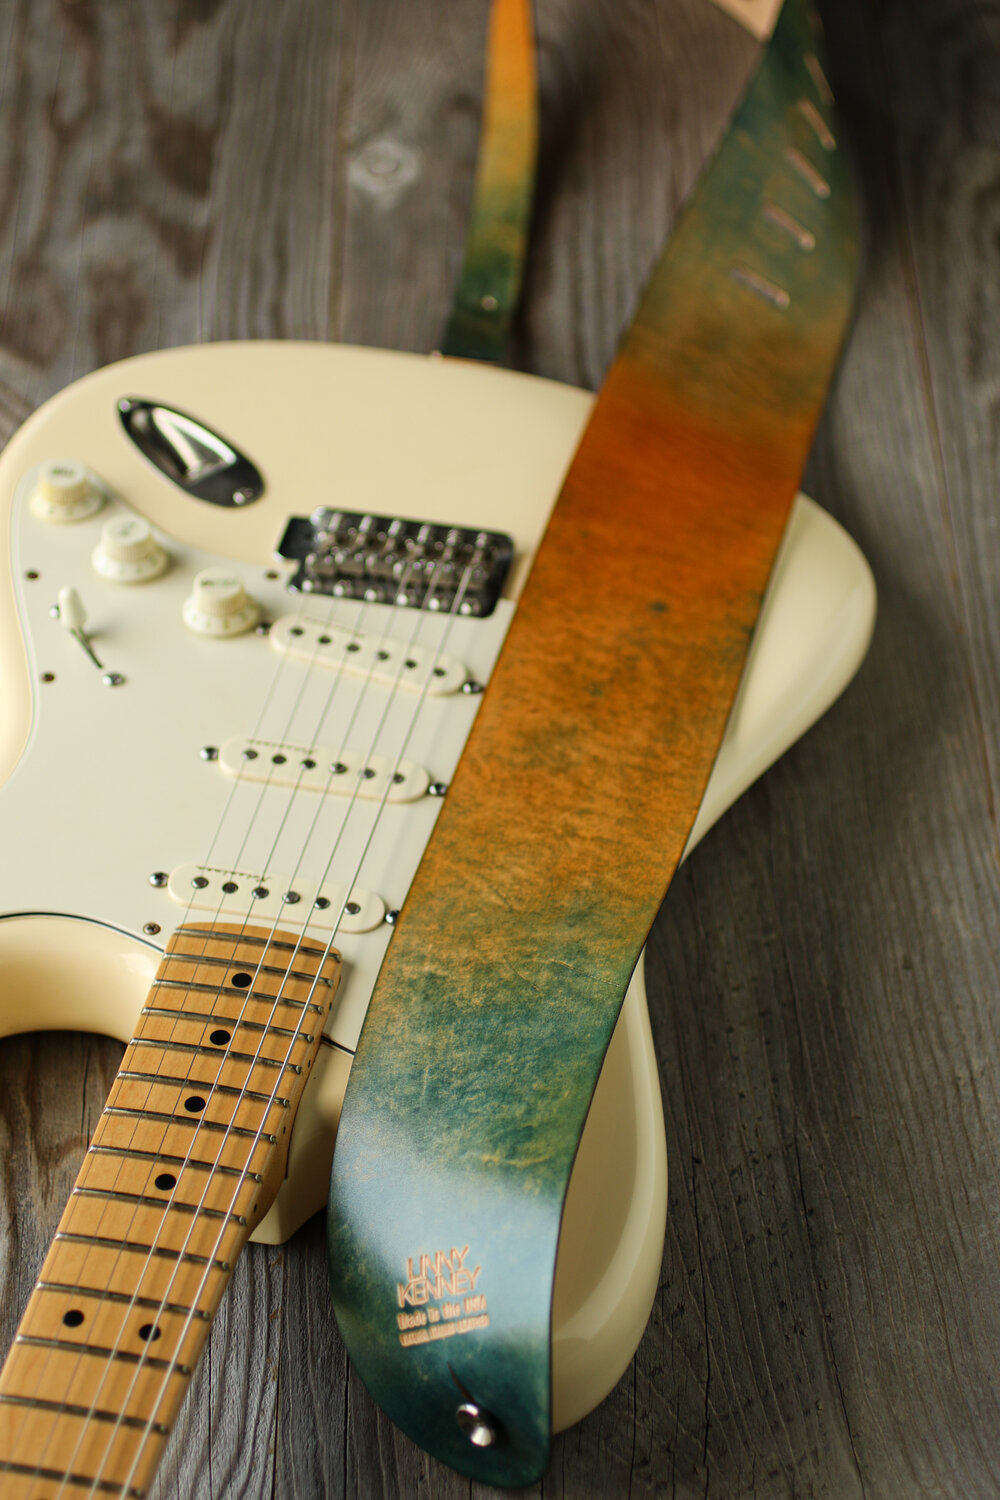 Natural Leather Guitar Straps — Linny Kenney